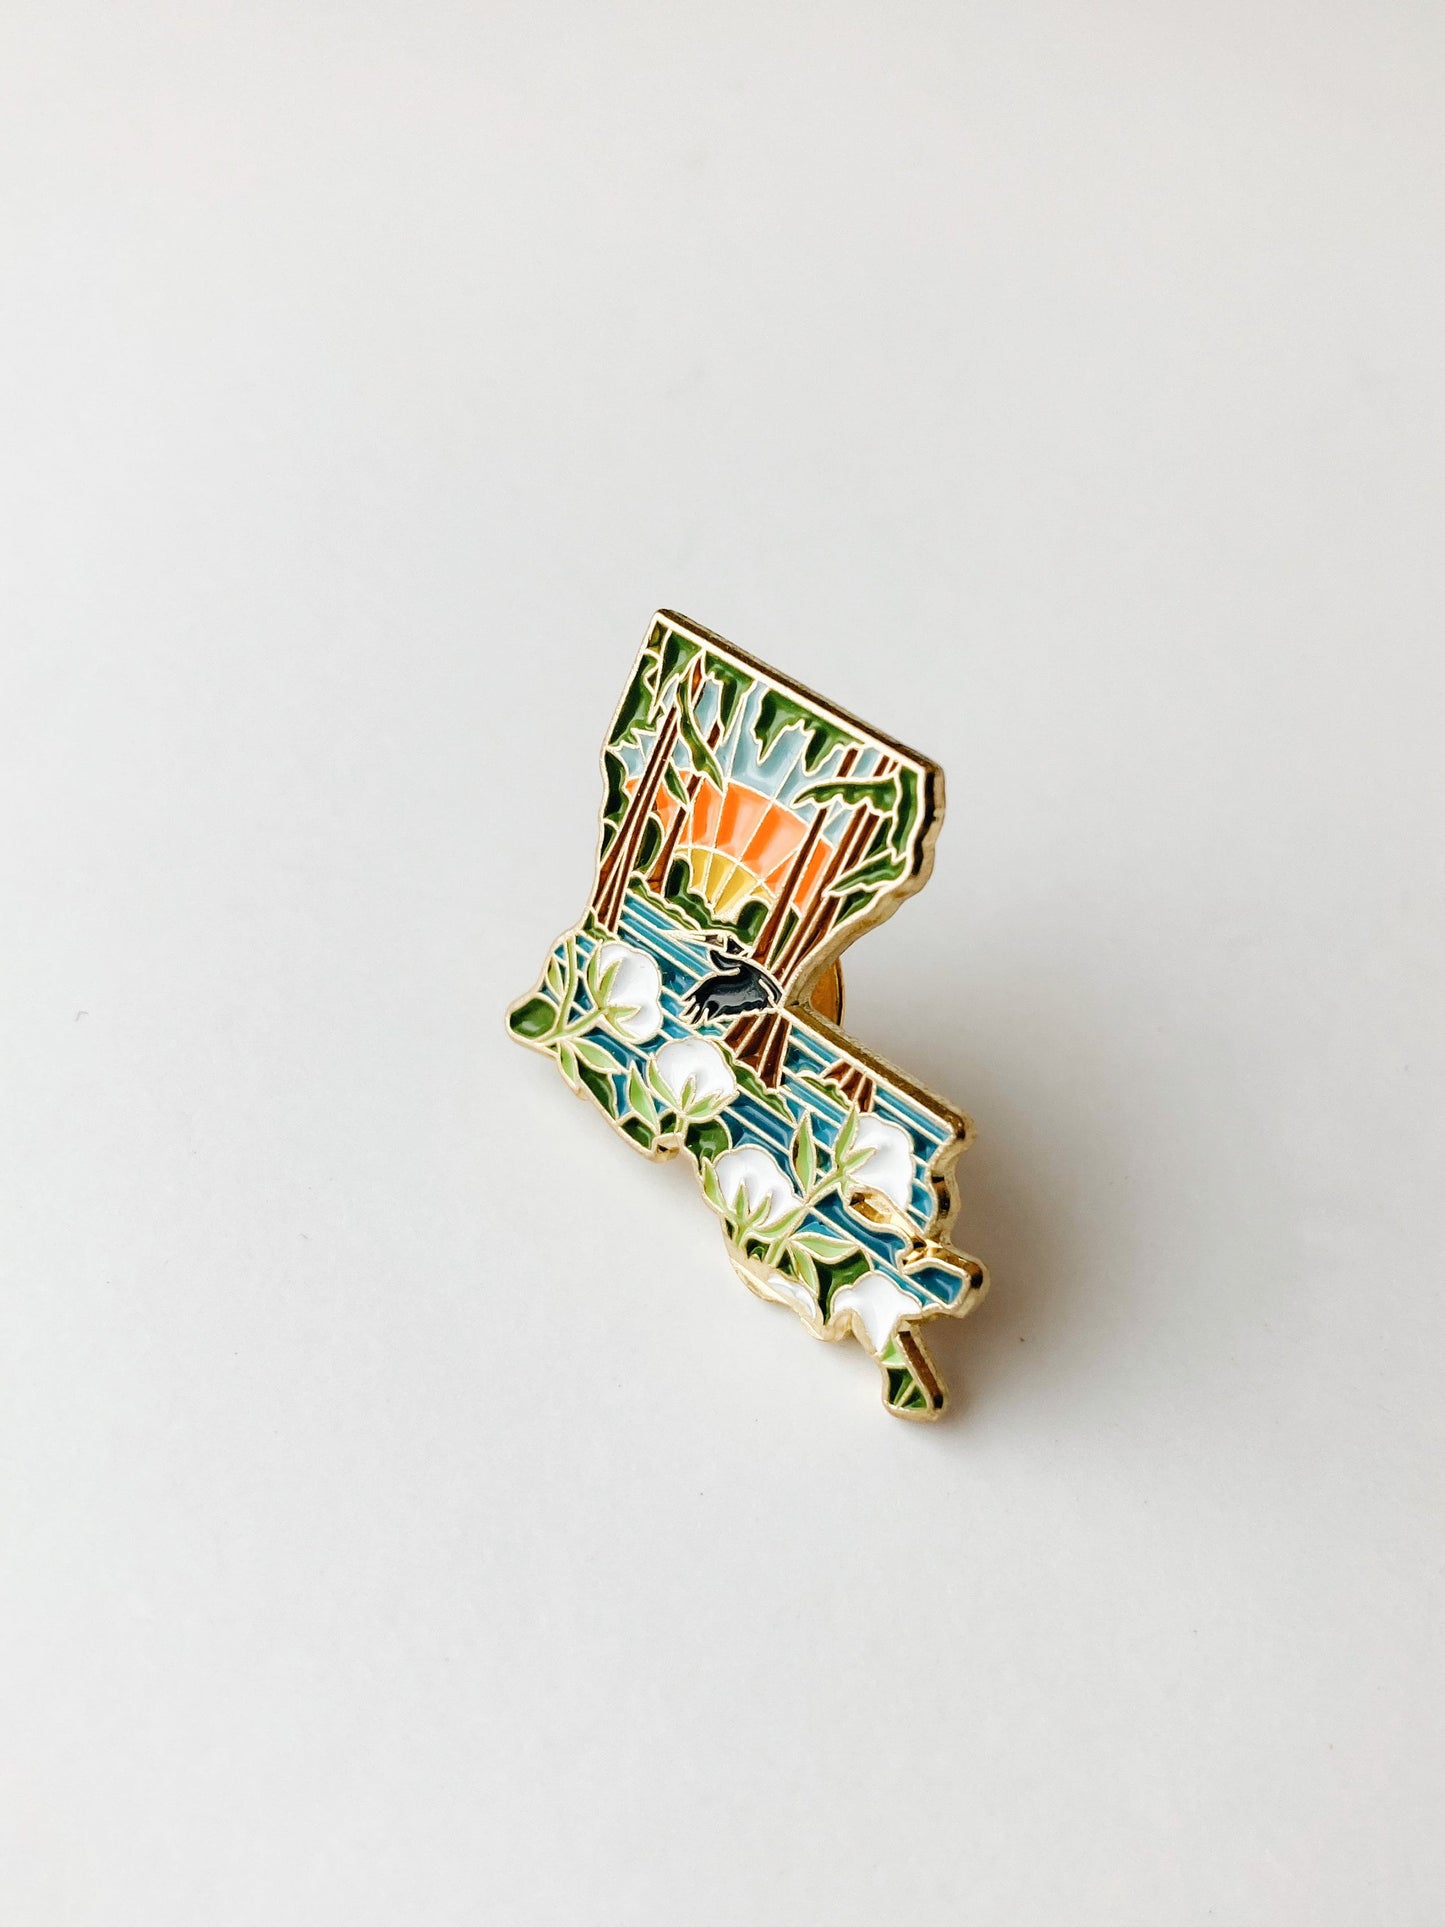 Louisiana Enamel Pin | Gold Soft Enamel Pin | Illustrated United States Pin | Butterfly Clasp | 1.25"